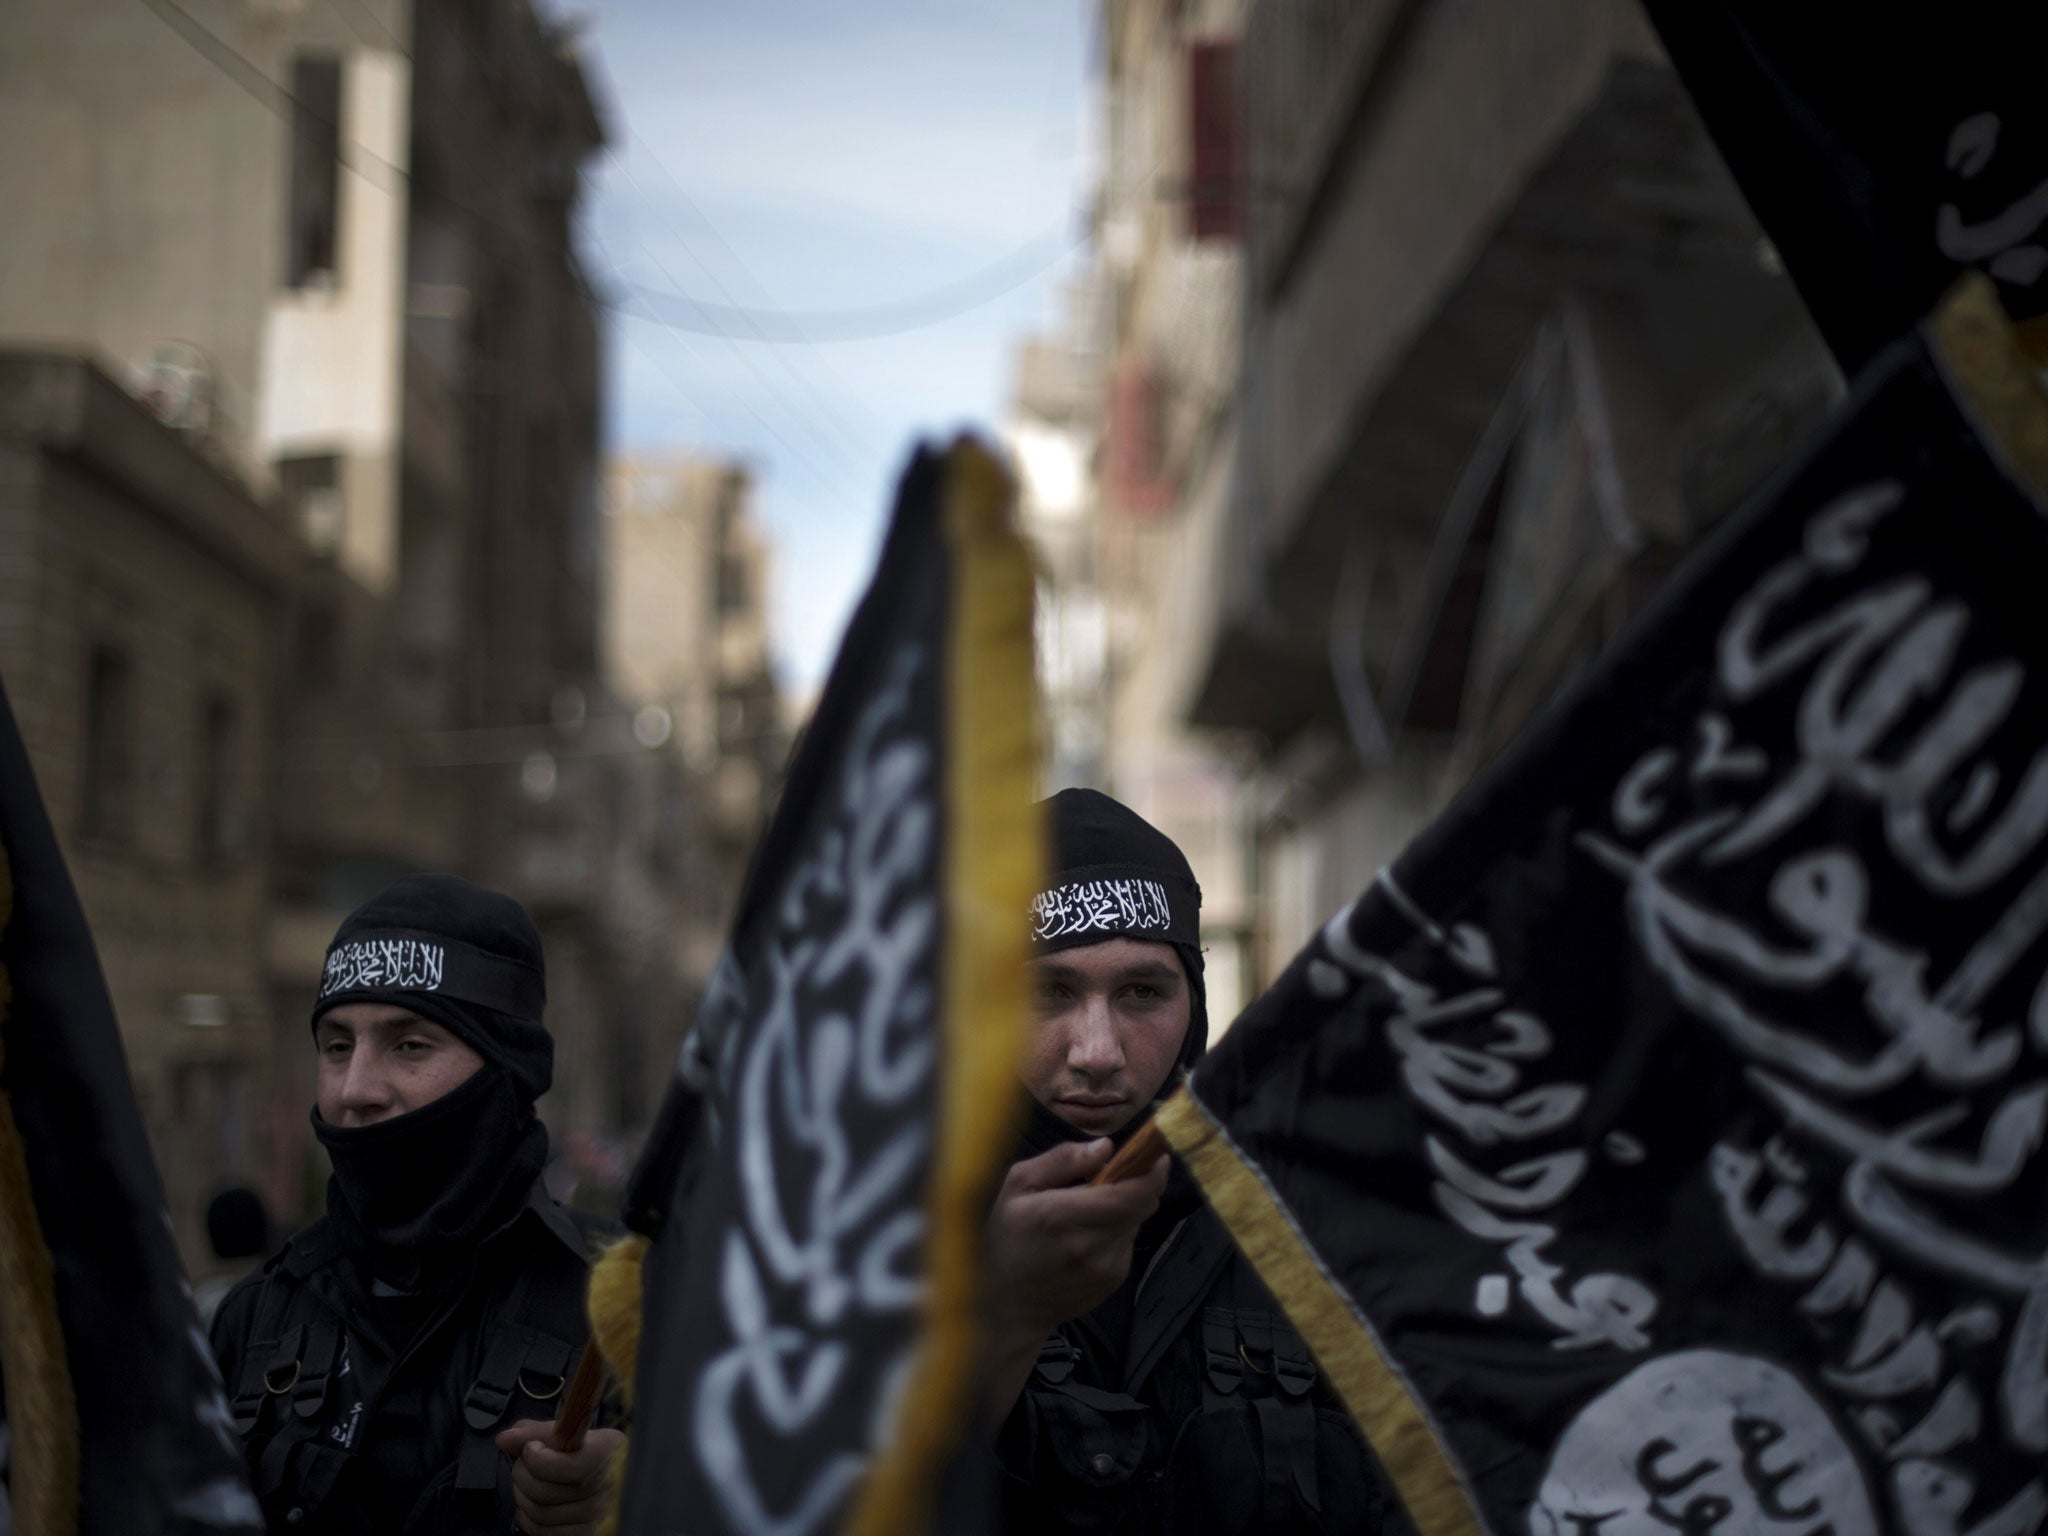 Members of the Islamist Liwa (brigade) Hamzah hold flags of Jebhat al-Nusra at a rally in Deir Ezzor earlier this year